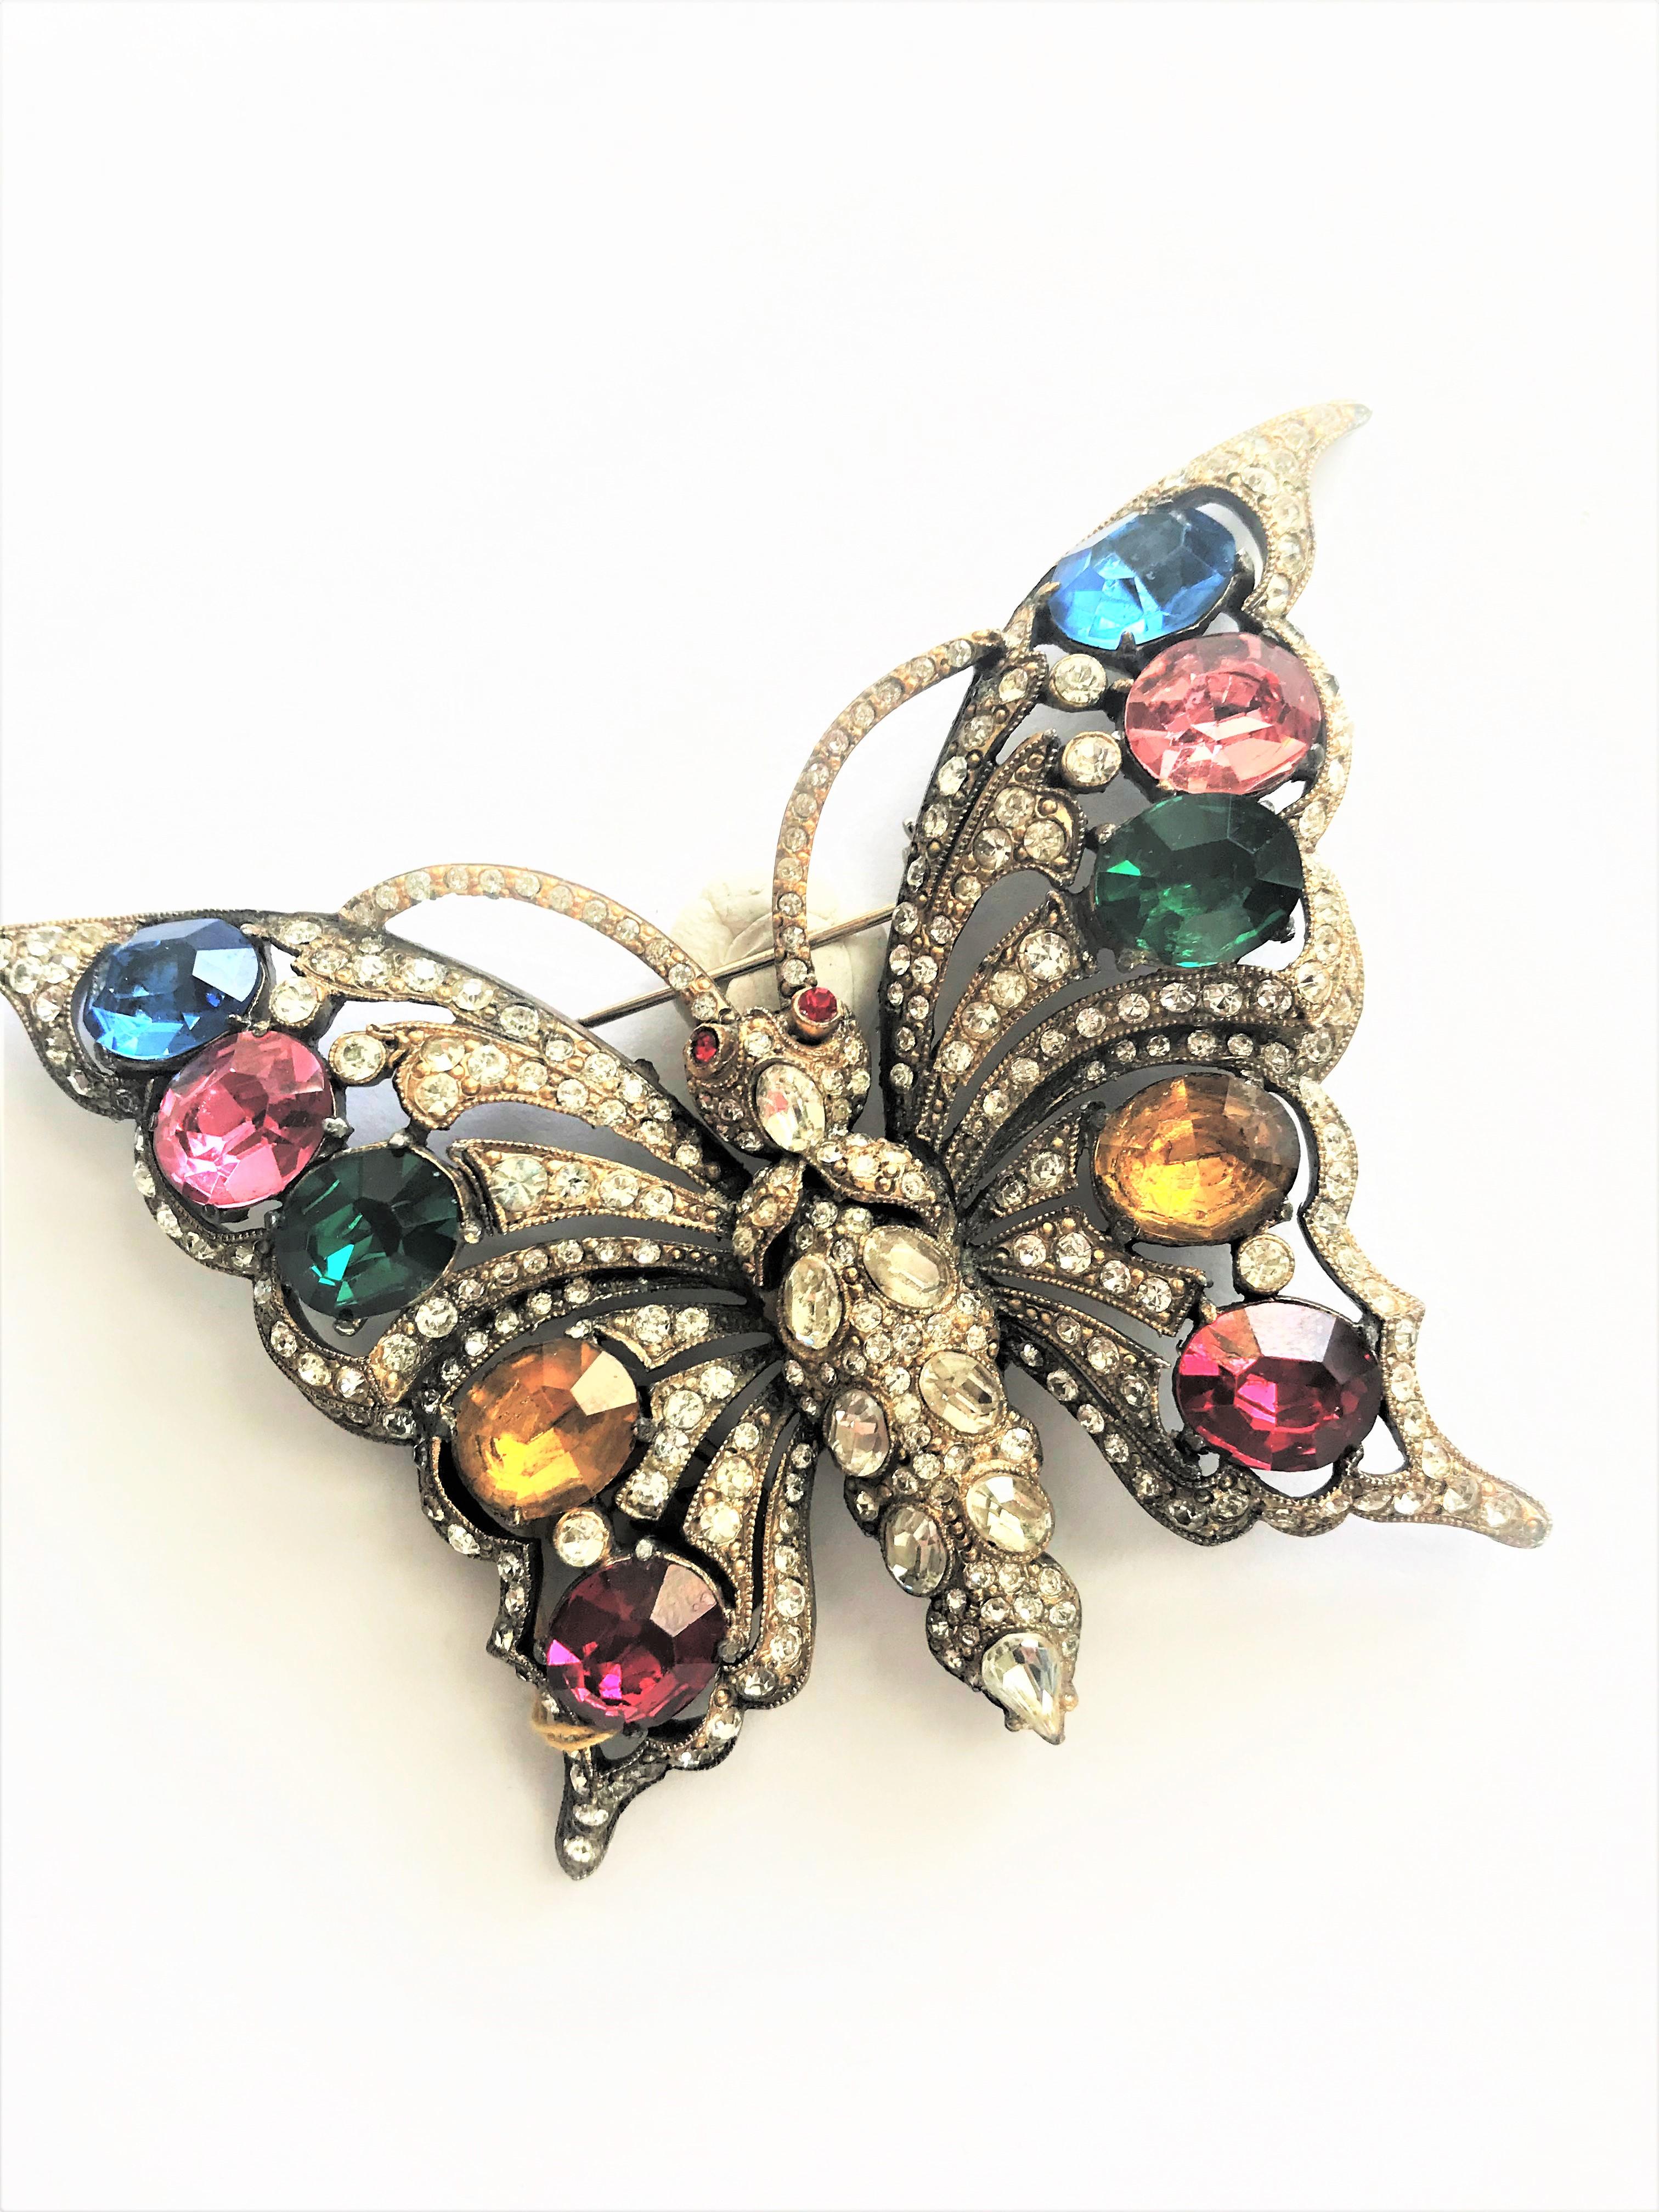 STARET BUTTERLY brooch gorgeous rhinestone decoration 1940s USA For Sale 4